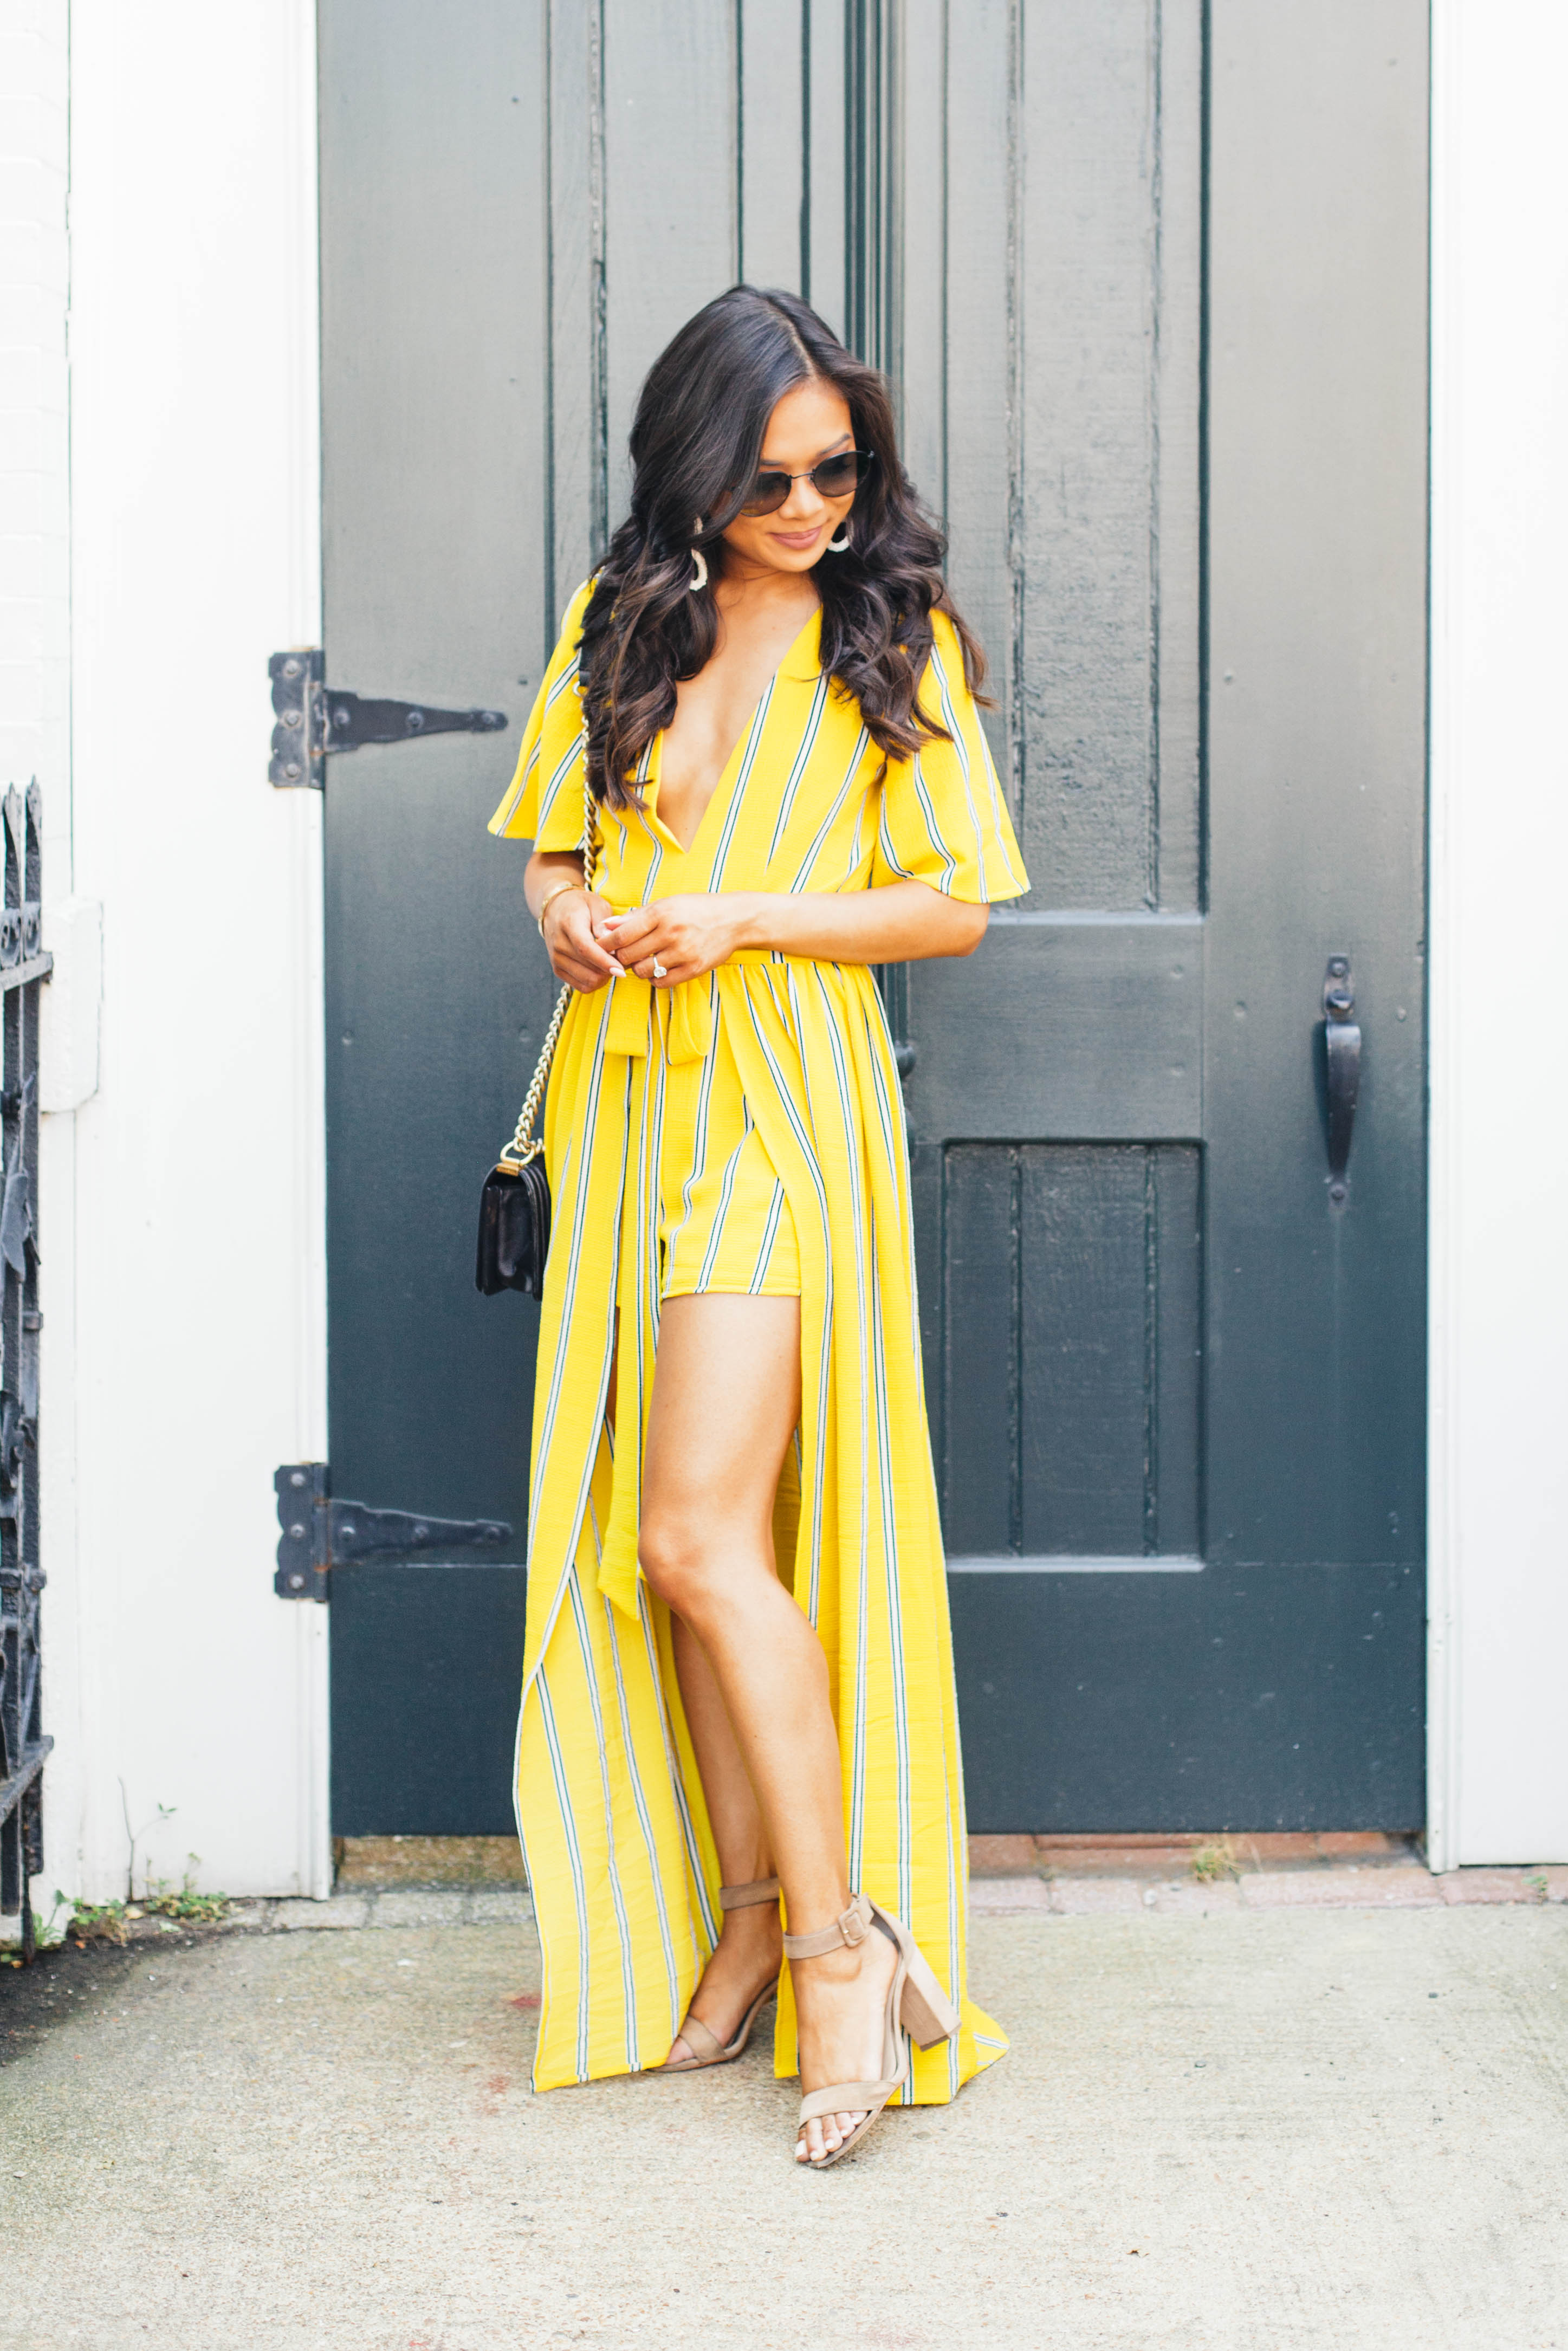 Hoang-Kim shares the best color to wear and stand out for summer